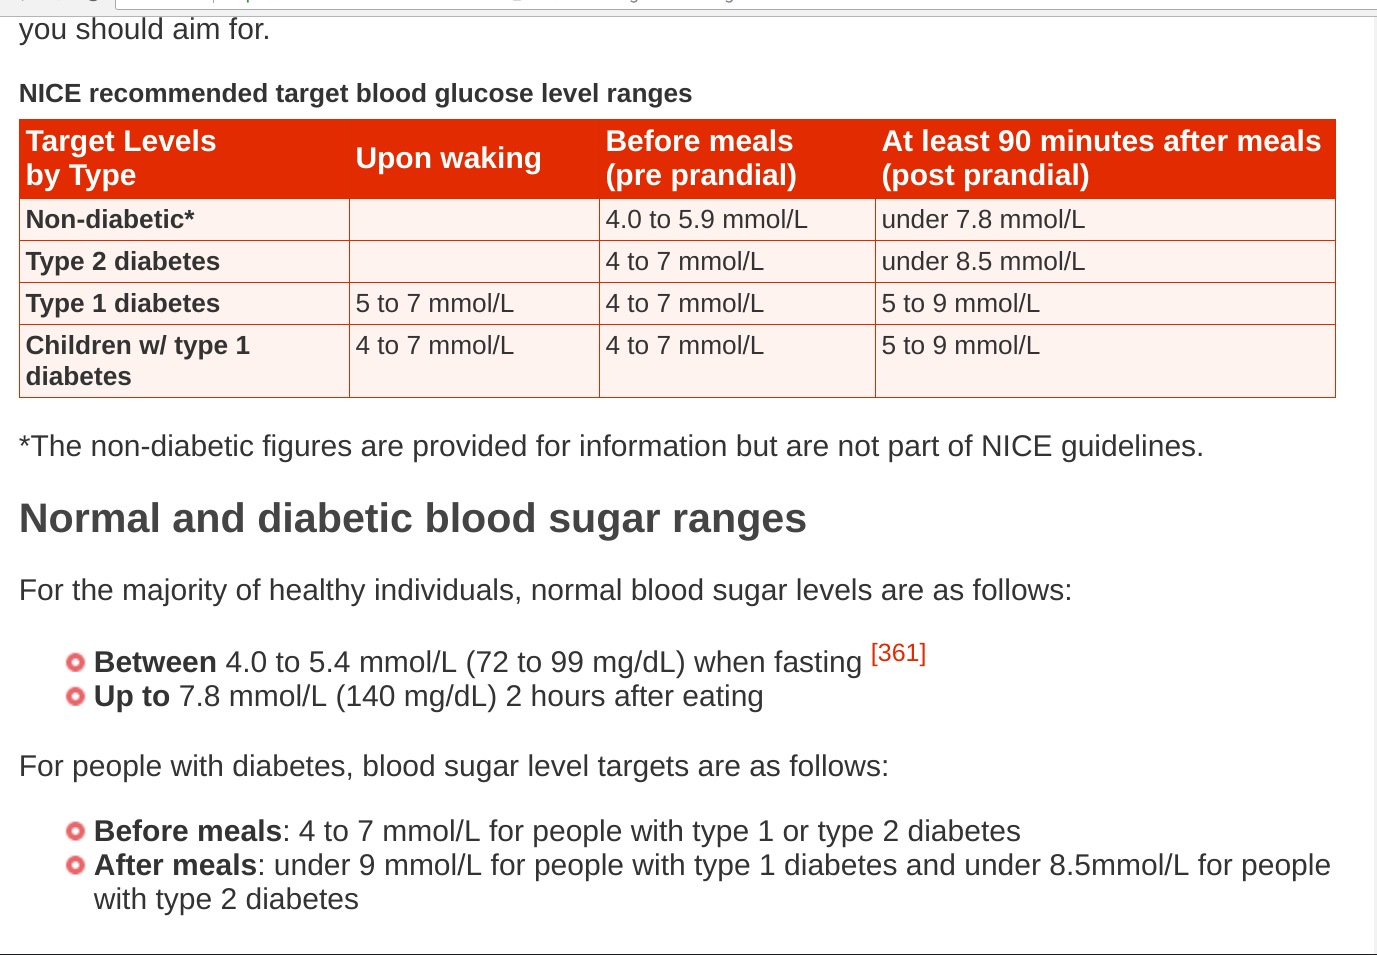 nice guidelines diabetes (type 1 children) diabetes with loss of protective sensation icd 10